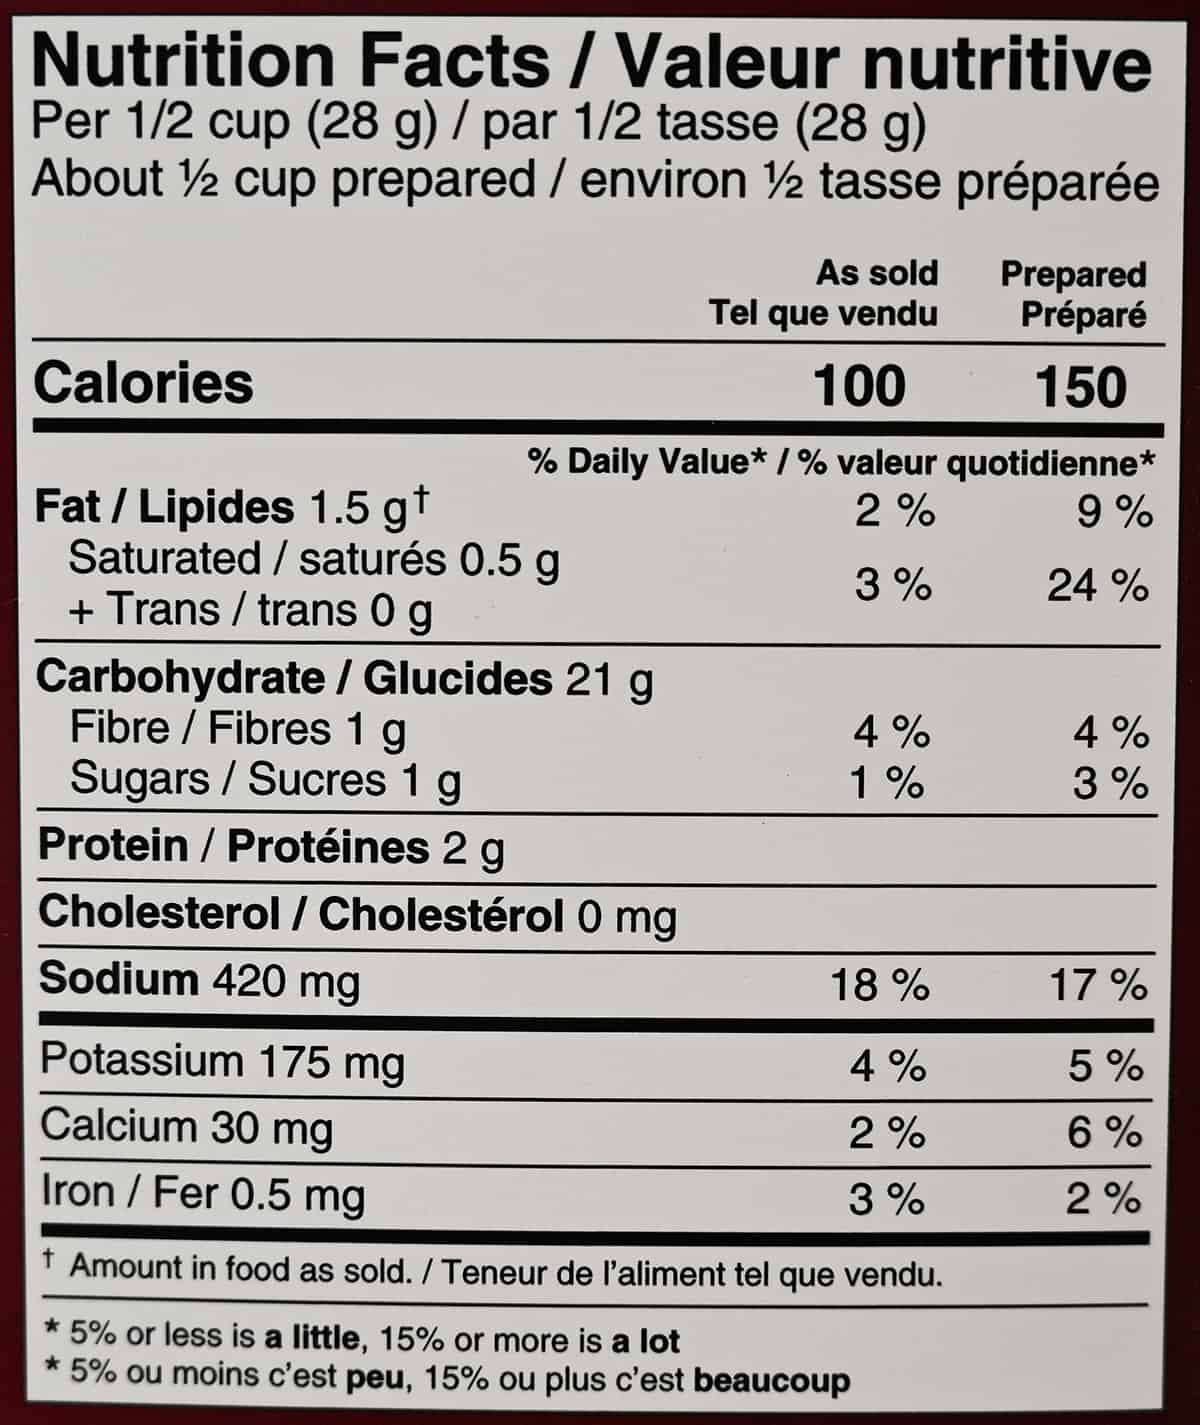 Image of the nutrition facts for the potatoes from the back of the box.